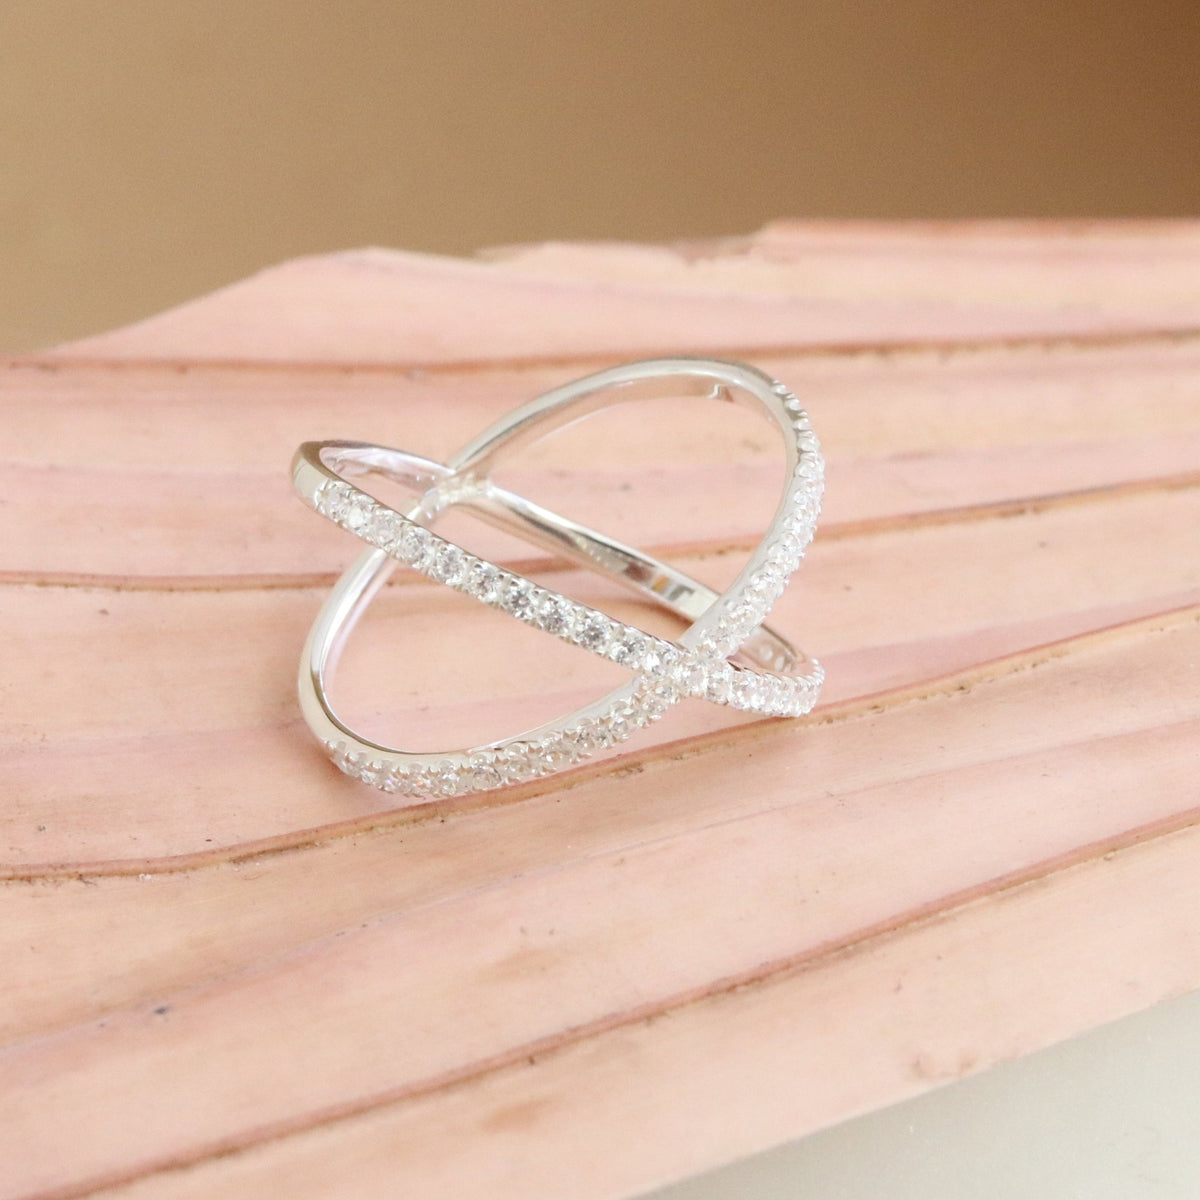 STAR CROSSED LOVE BAR RING - CUBIC ZIRCONIA &amp; SILVER - SO PRETTY CARA COTTER